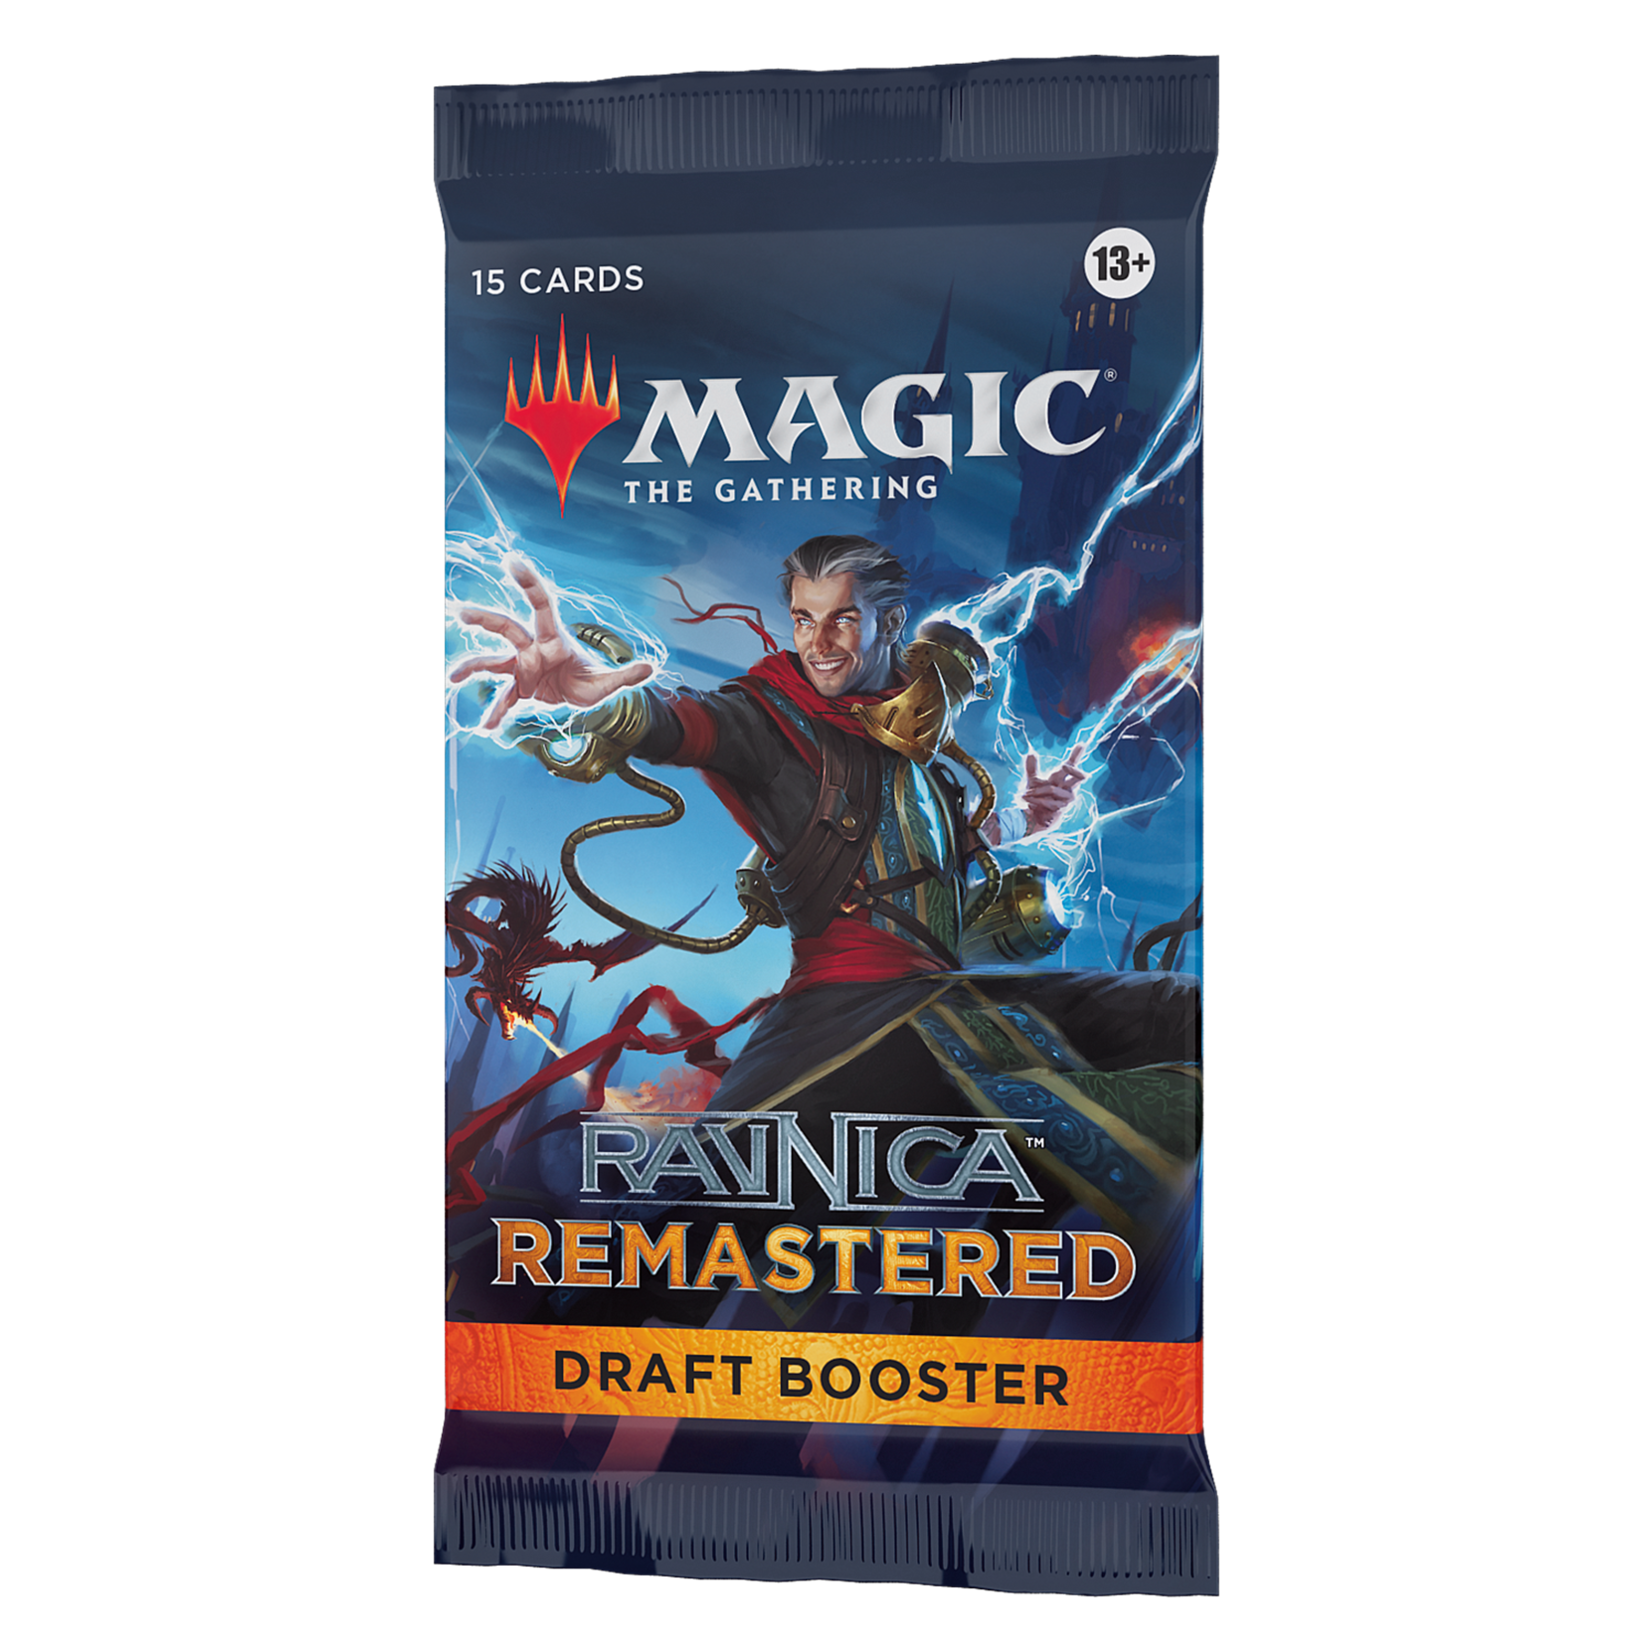 Magic: The Gathering Magic: The Gathering – Ravnica Remastered, Draft Booster Pack